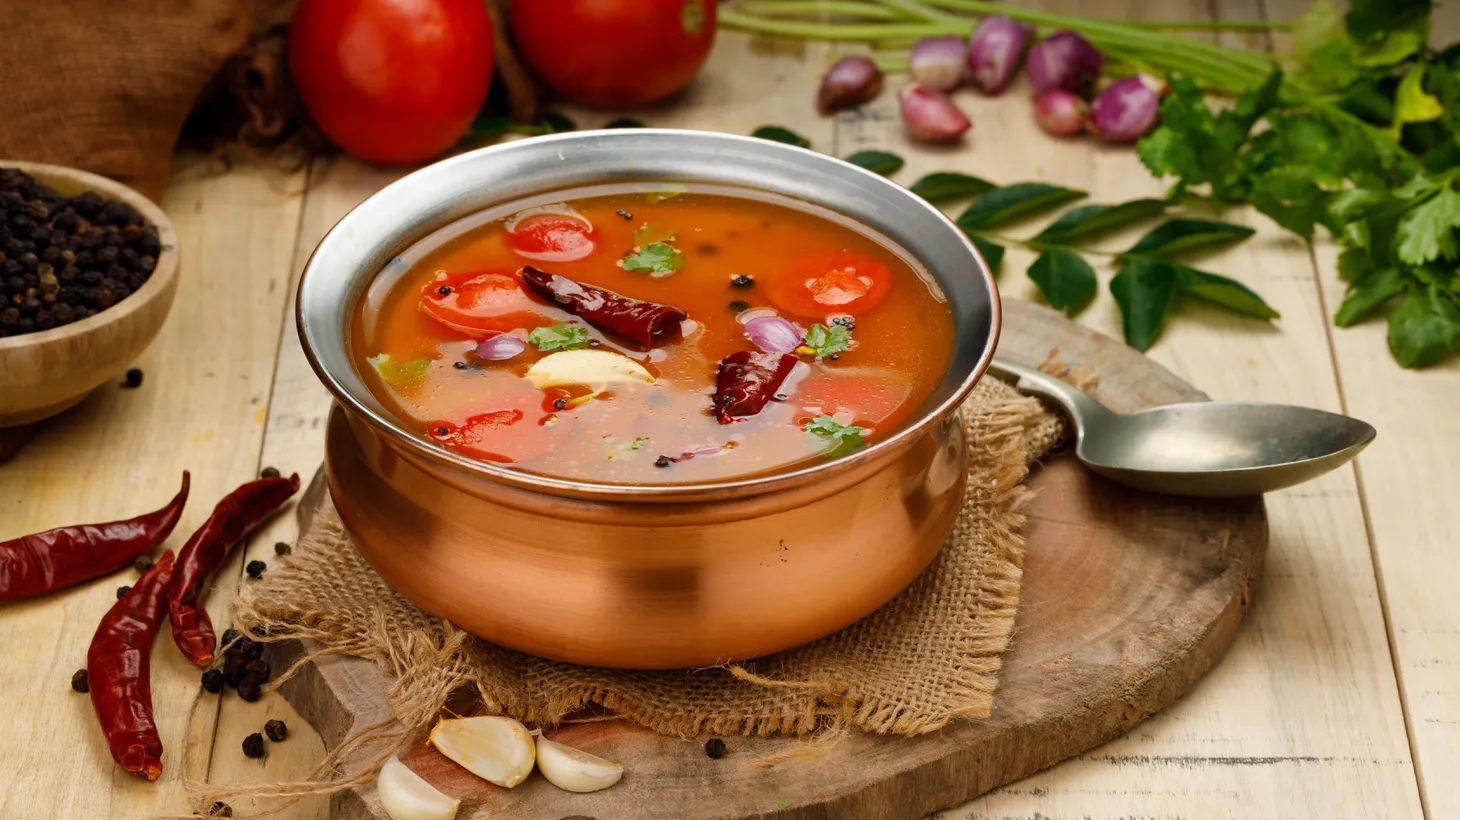 Rasam is a thin, brothy soup made from the stock of cooking pulses and lentils, and often it includes tomatoes. It’s a popular dish in the border regions of India.